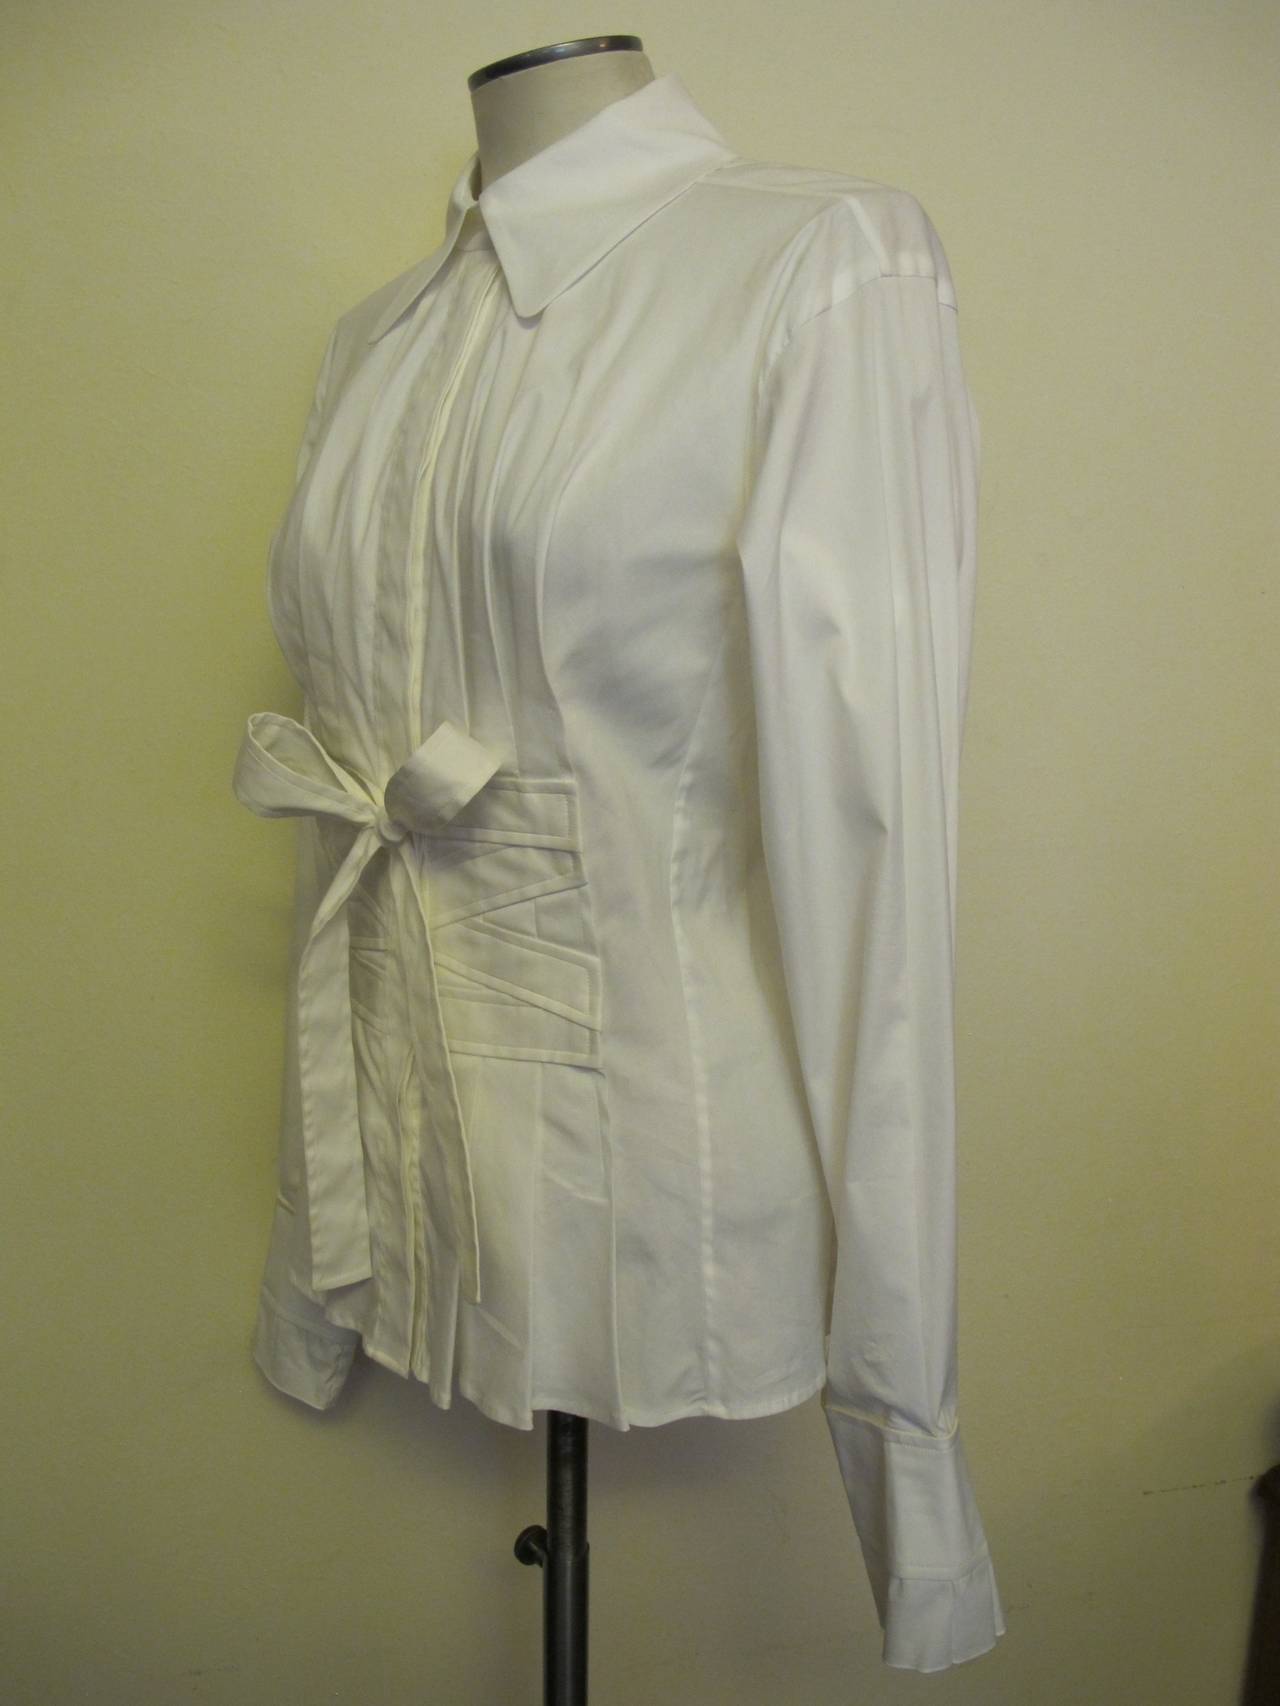 This blouse served as editorial for the YSL House. The material stretches. There is a criss cross and a bow design on the waist with pleats at the bottom of the blouse. There are pleats at the bottom of the cuff. Sleeve Length measures 25 inches.